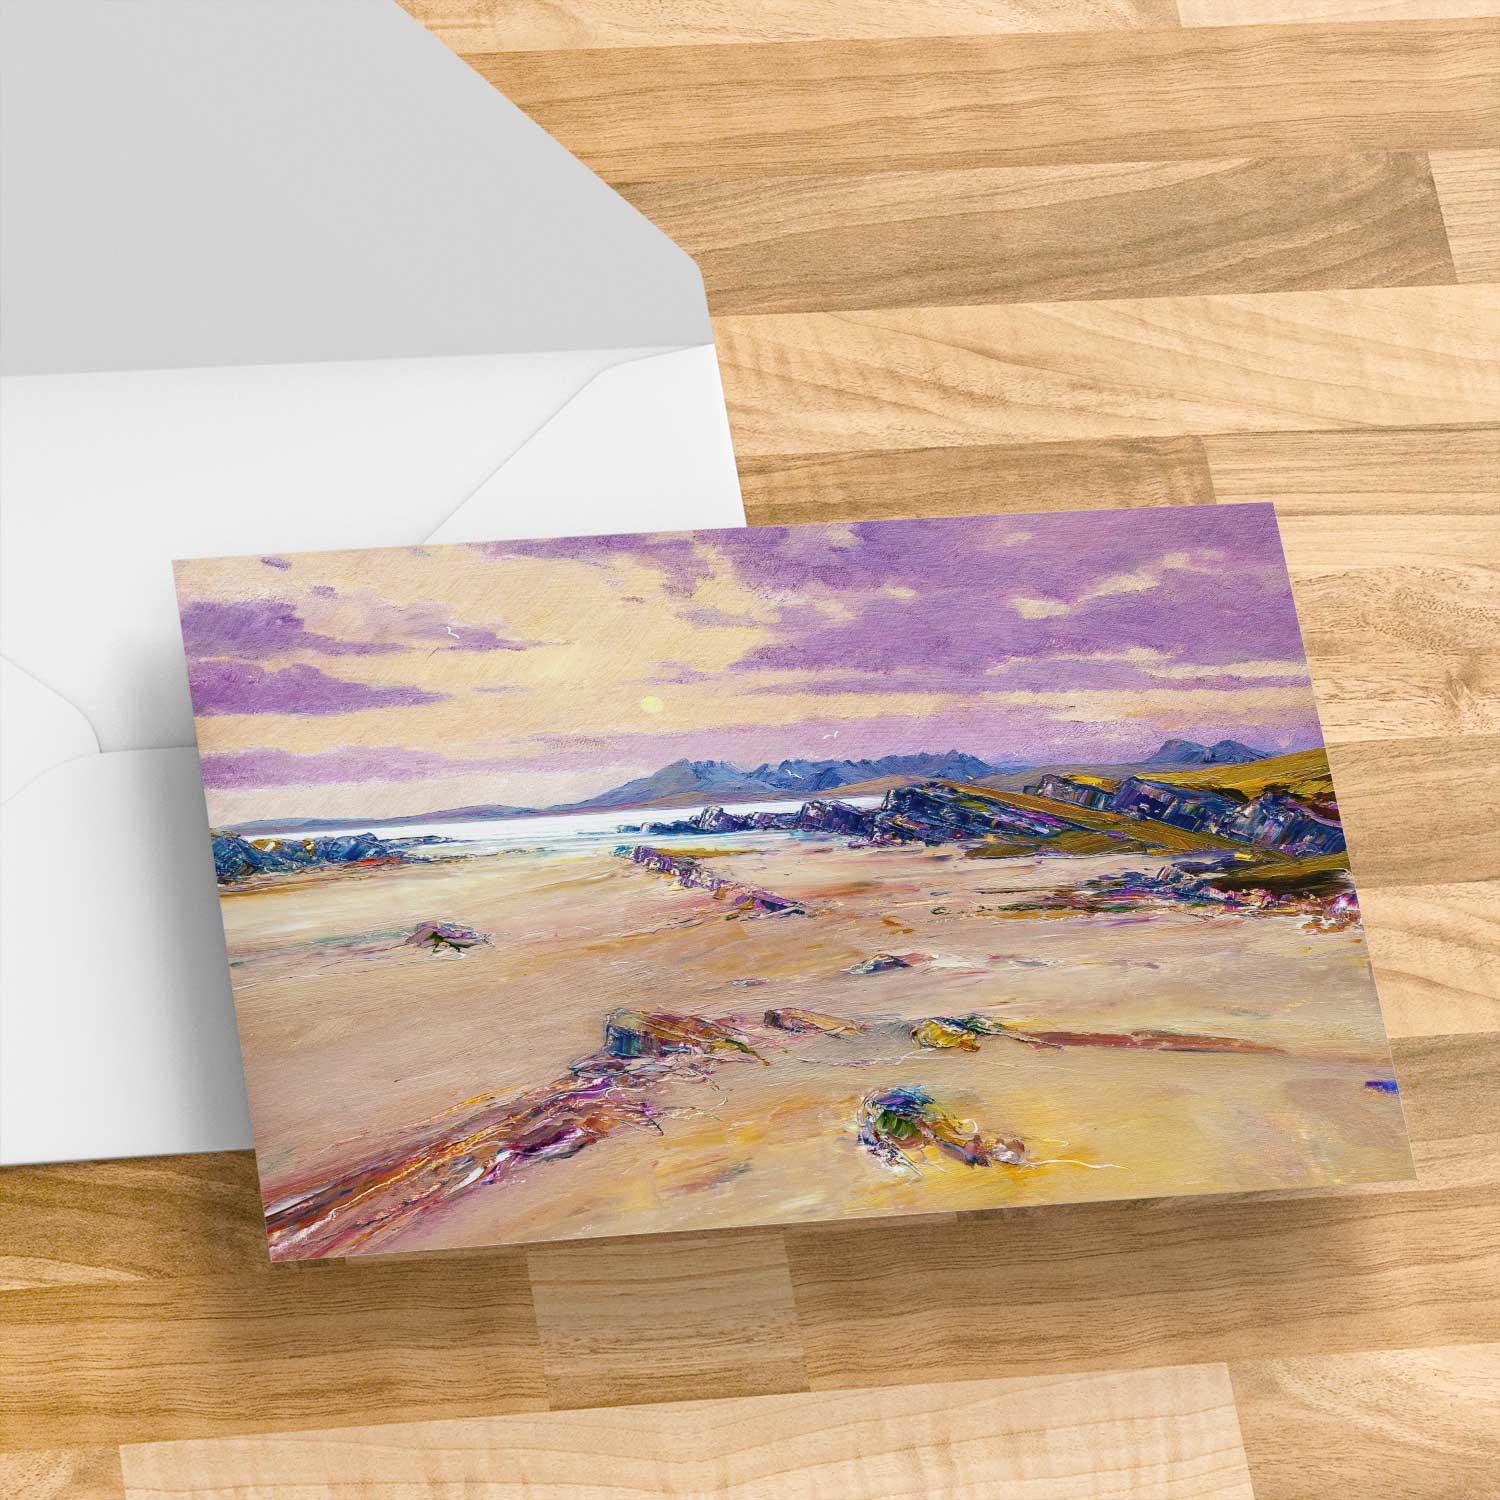 Skye from Arisaig Greeting Card from an original painting by artist John Bathgate